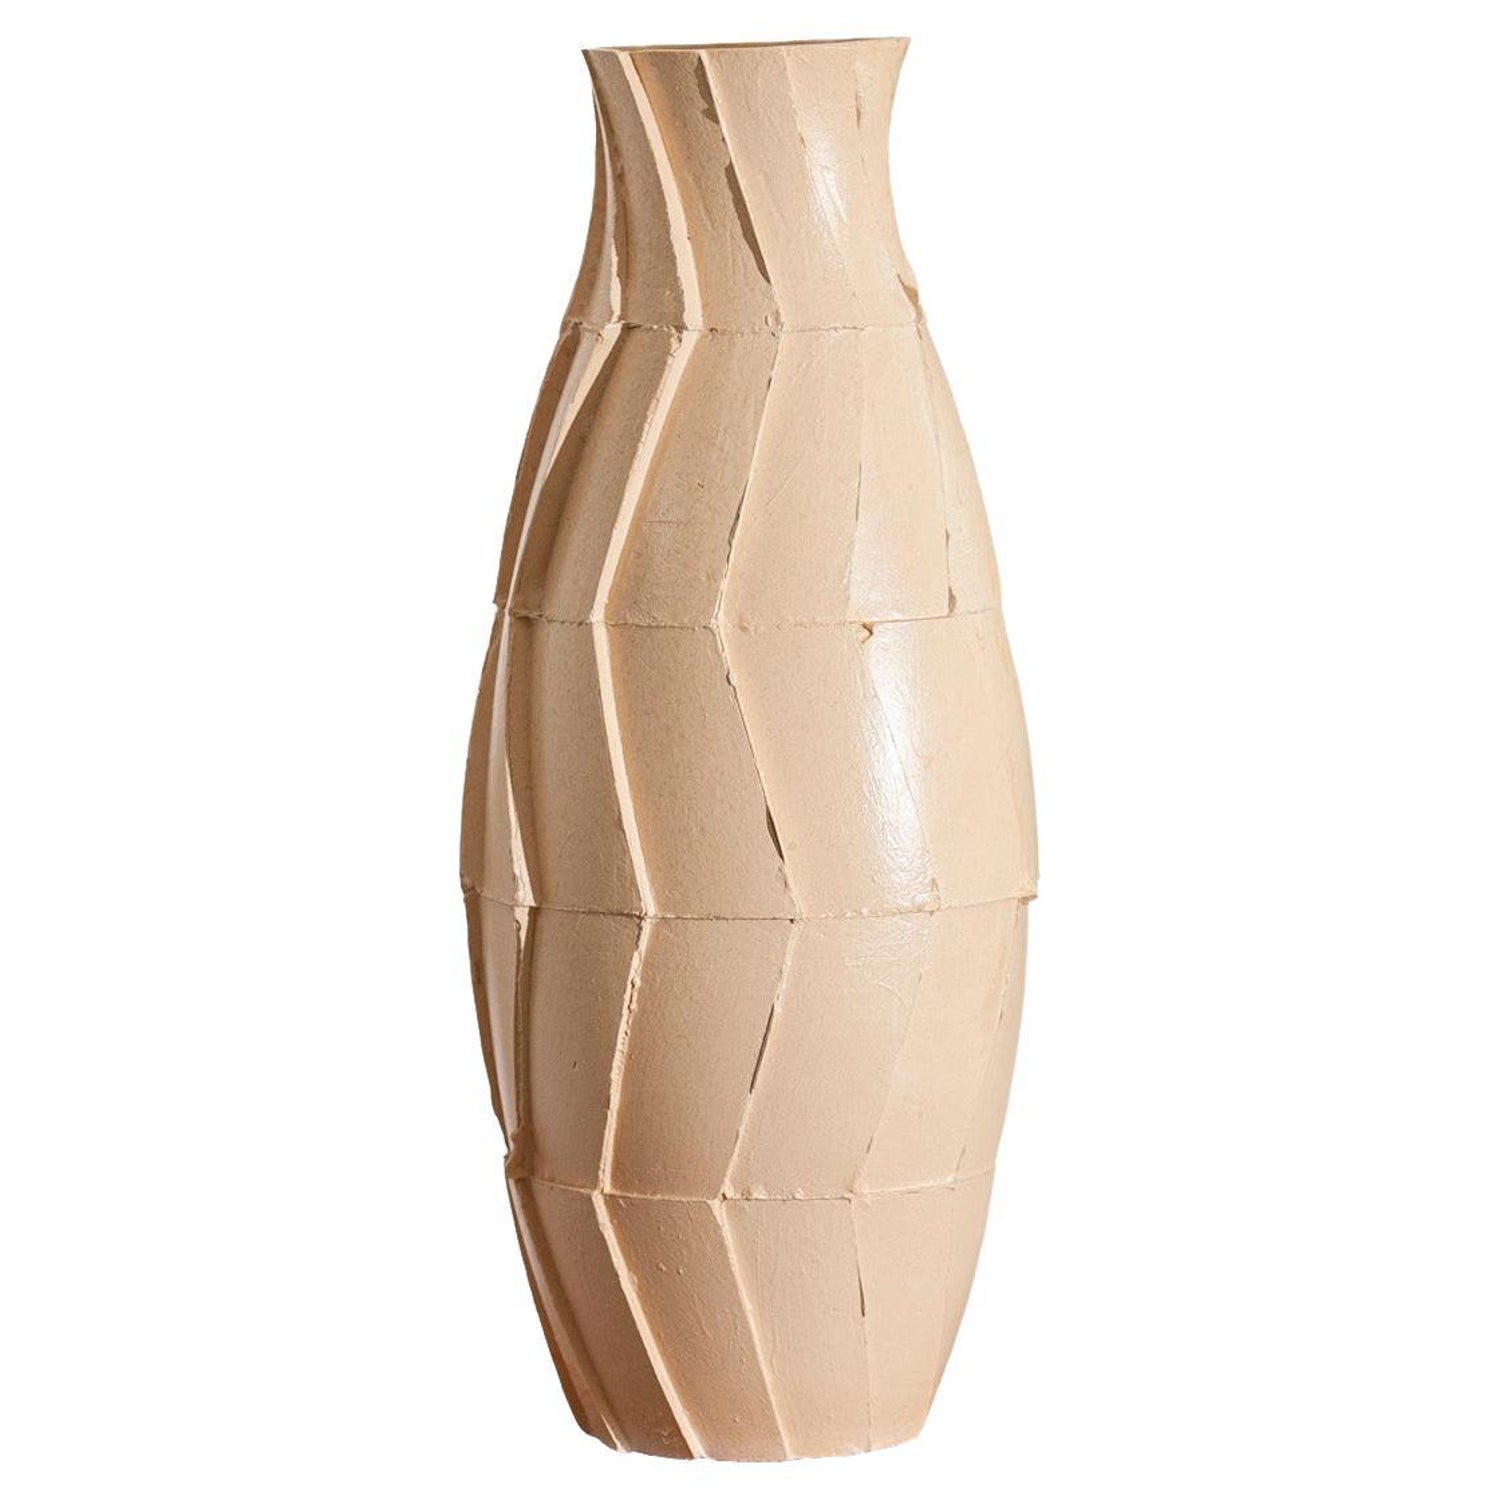 Unique Contemporary Vase - Salted Glaze Stoneware designed by Vitor  Agostinhp For Sale at 1stDibs